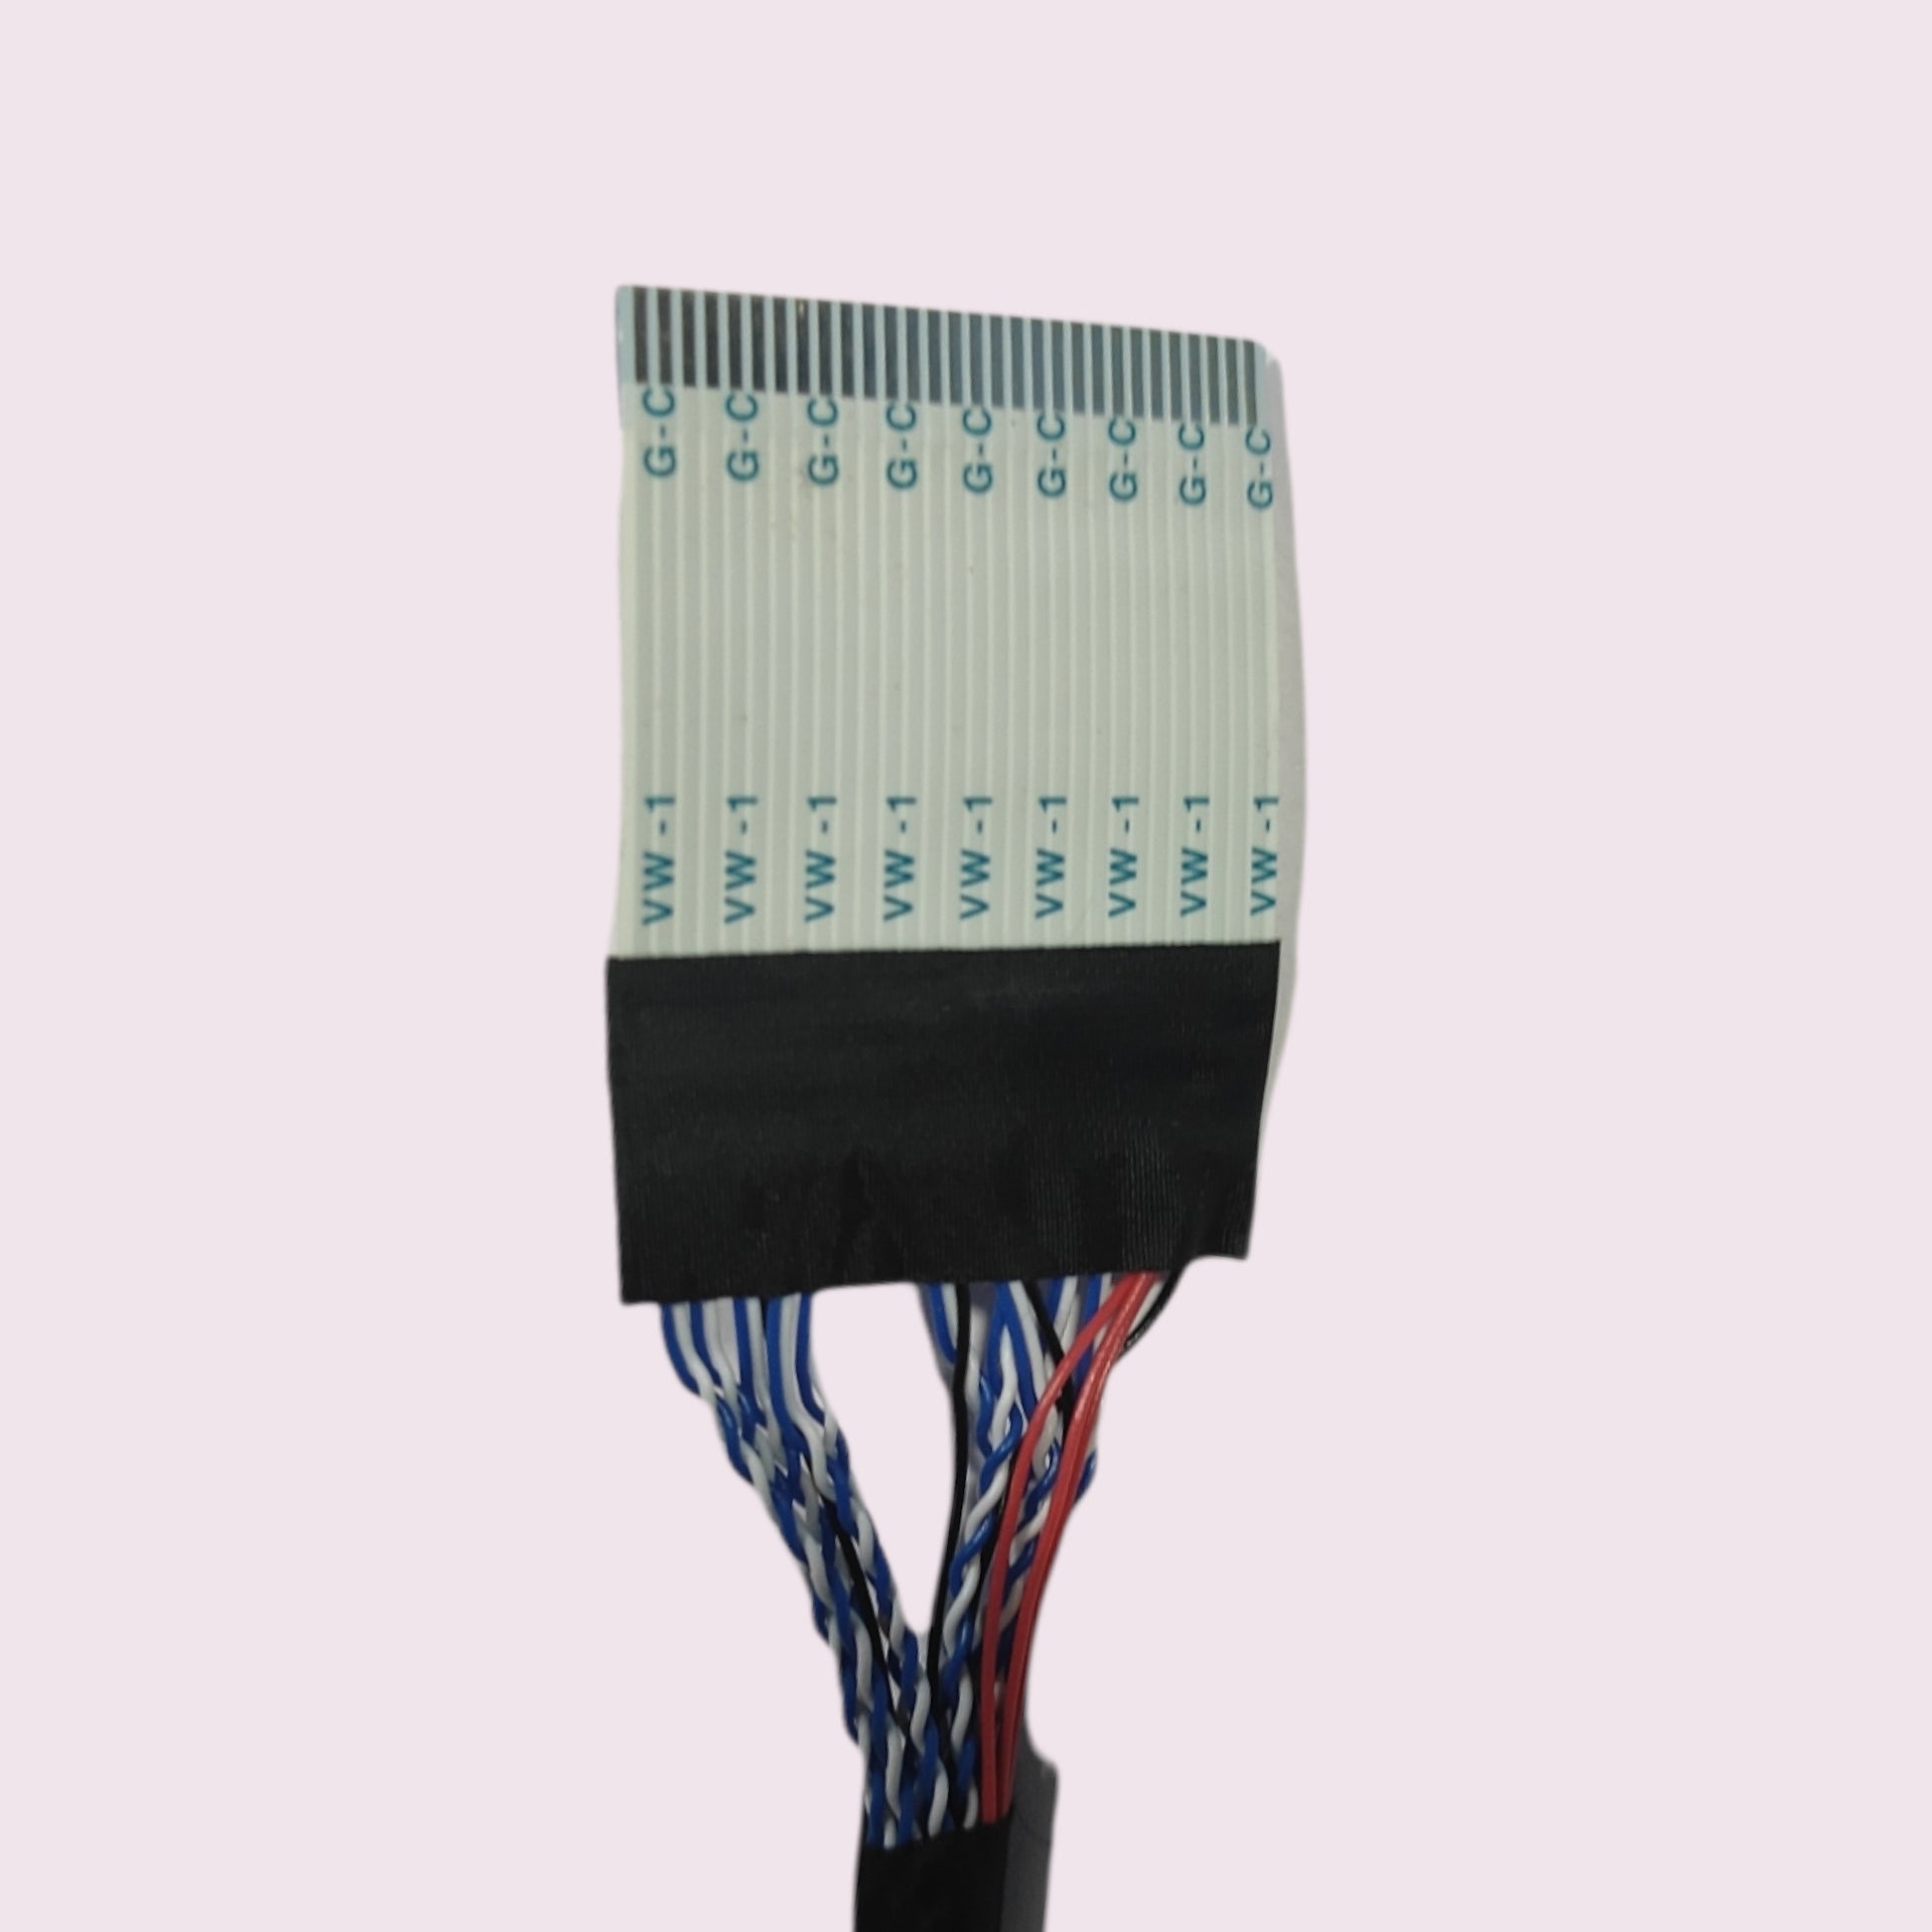 LVDS Cable 01 - Faritha